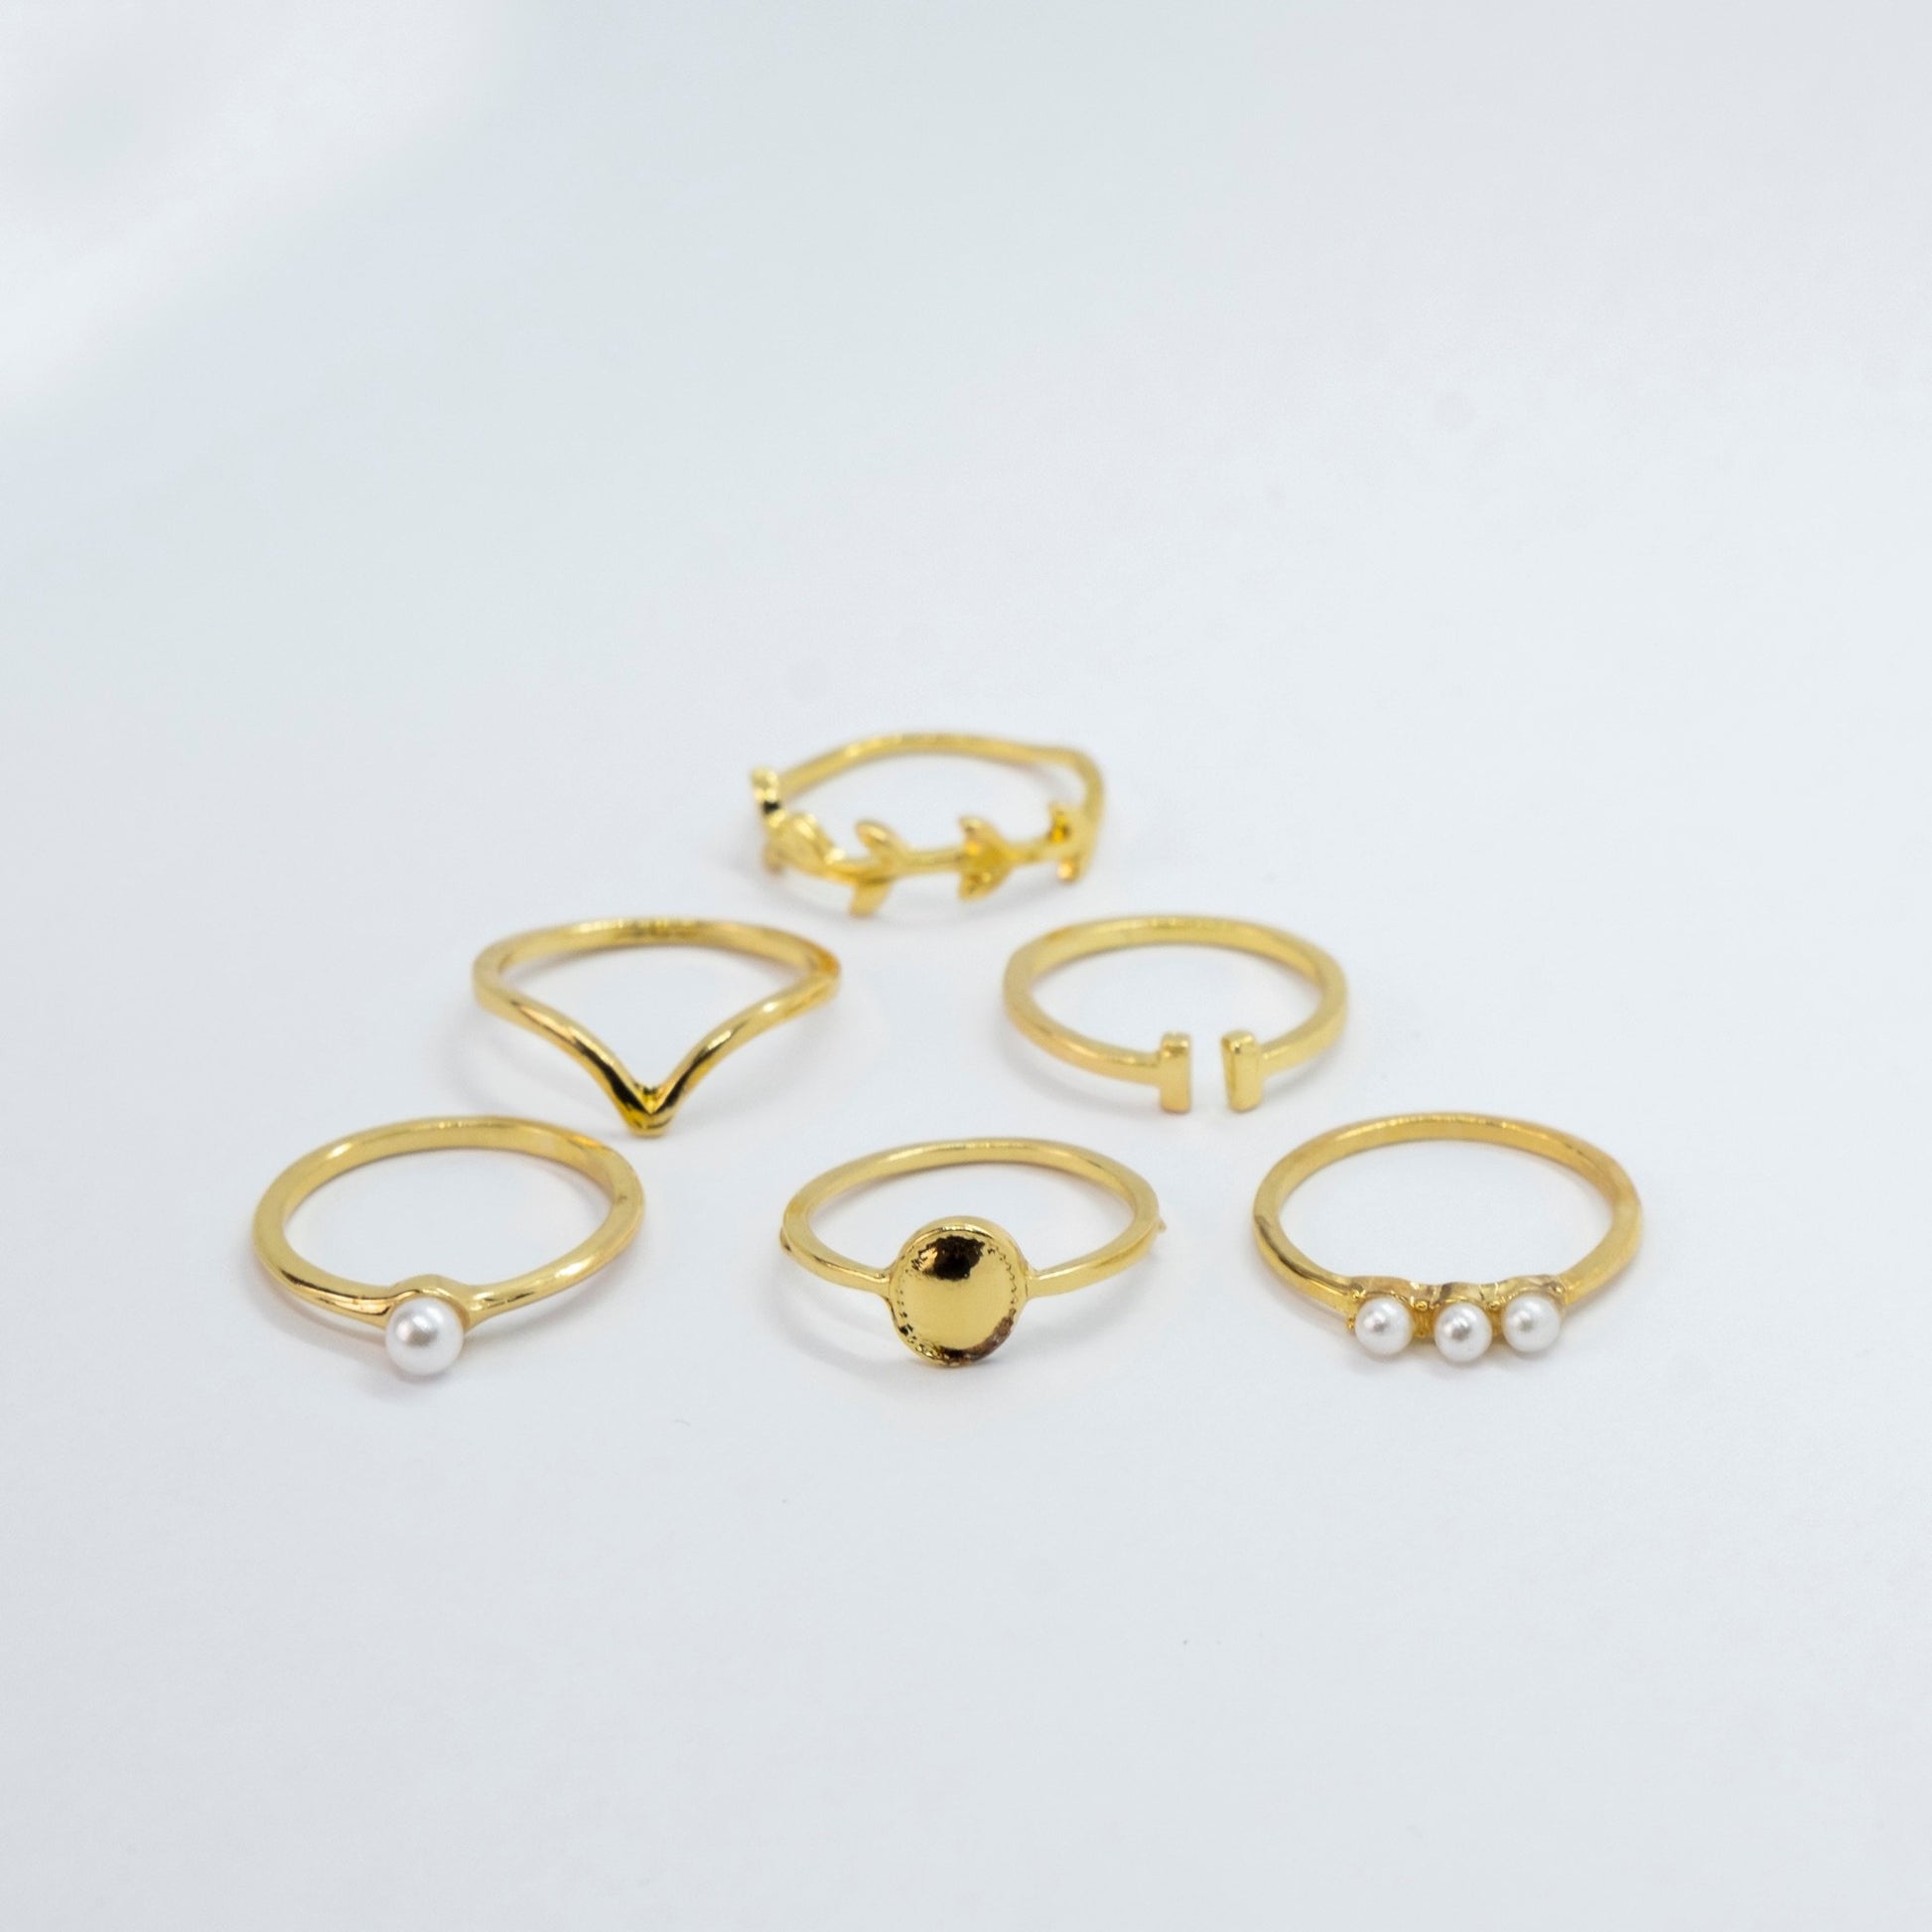 6 Piece Gold Plated Oxidised Bohemian Vintage Tribal Stacking Retro Ring Set